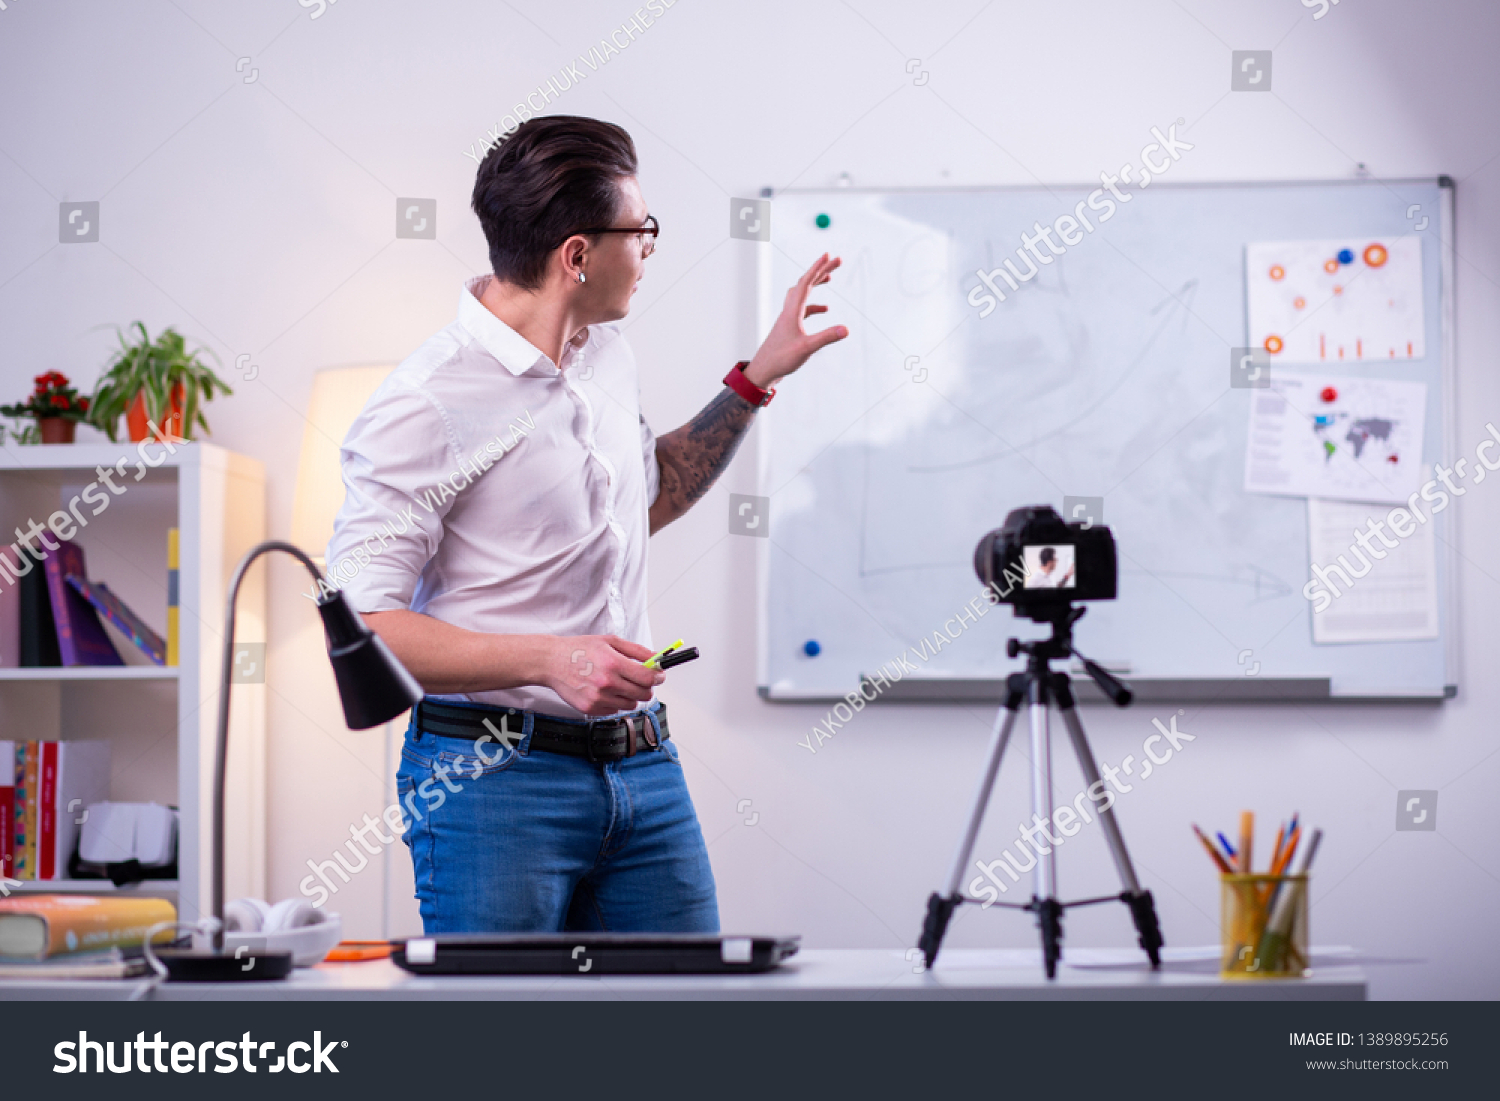 Professional science blogger. Expressive dark-haired man wearing neat white shirt and pointing on the desk with graphics #1389895256